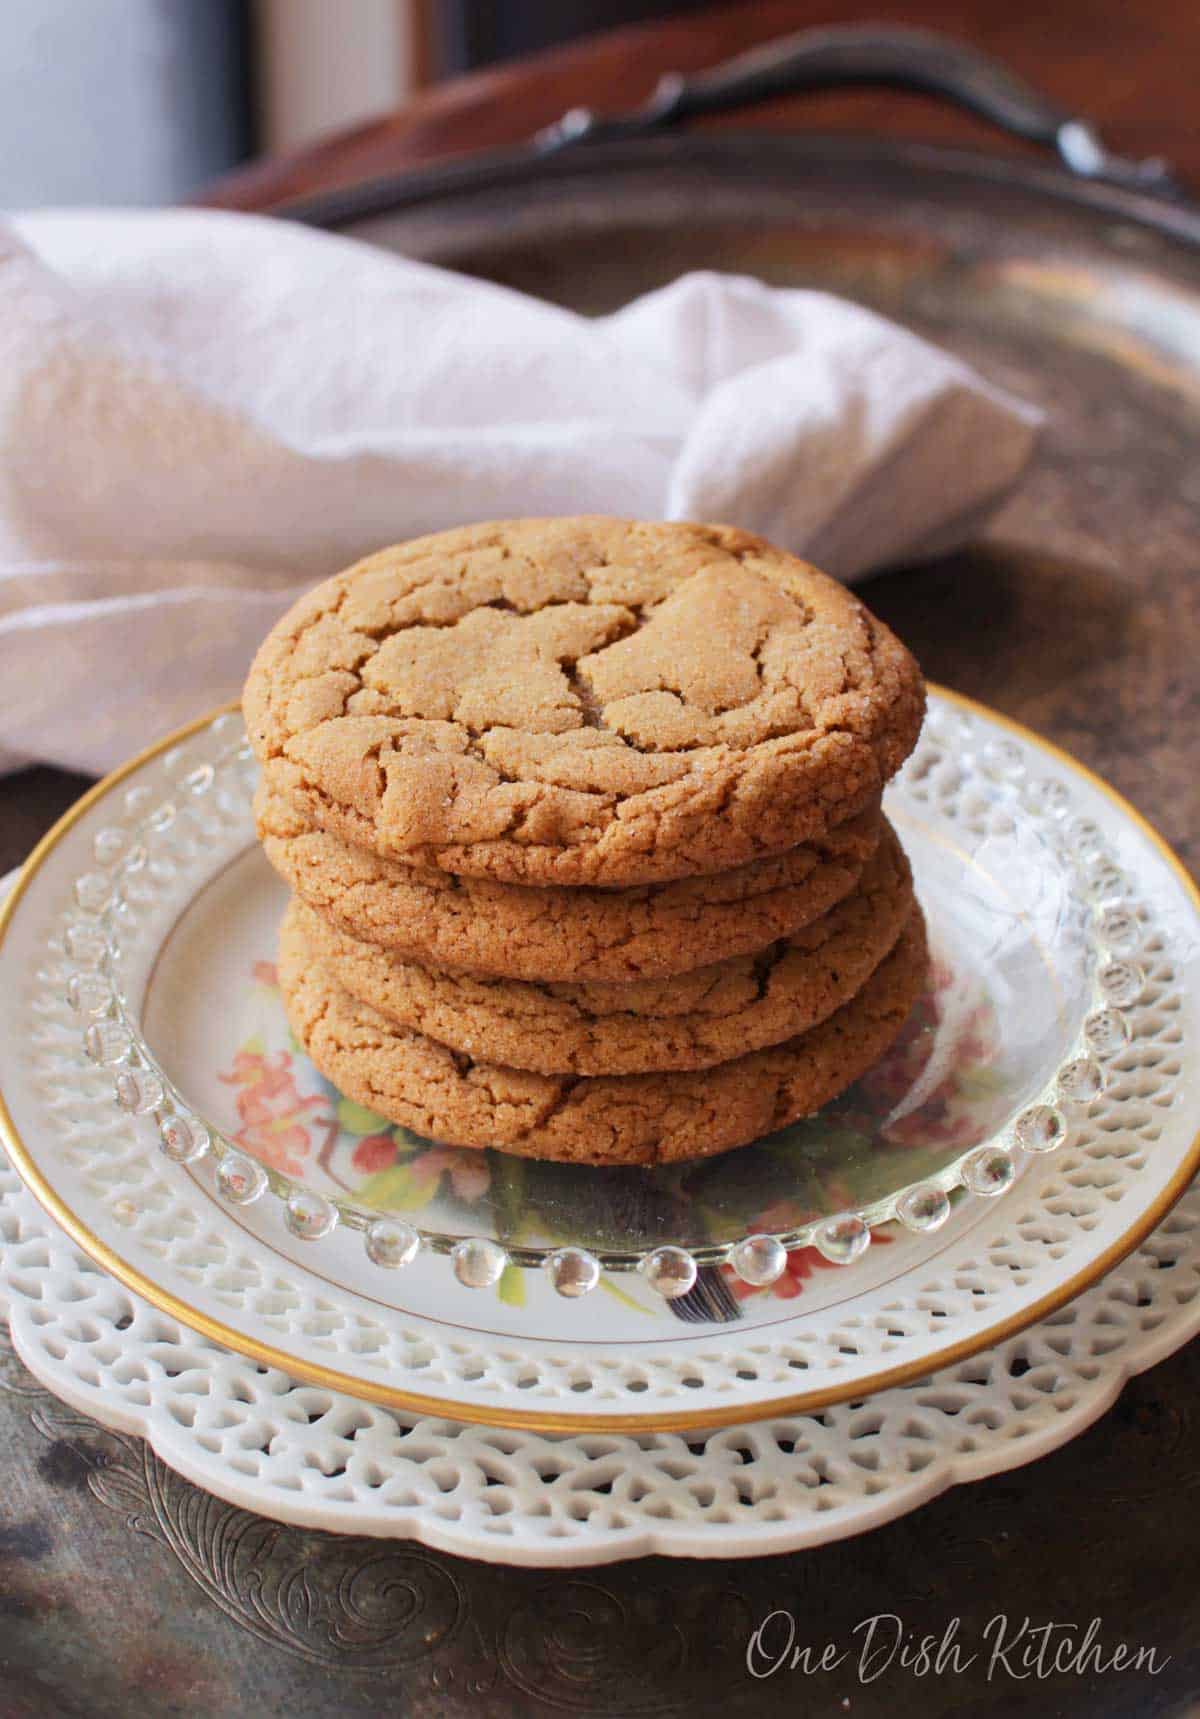 A stack of four soft ginger cookies plated on a metal tray.